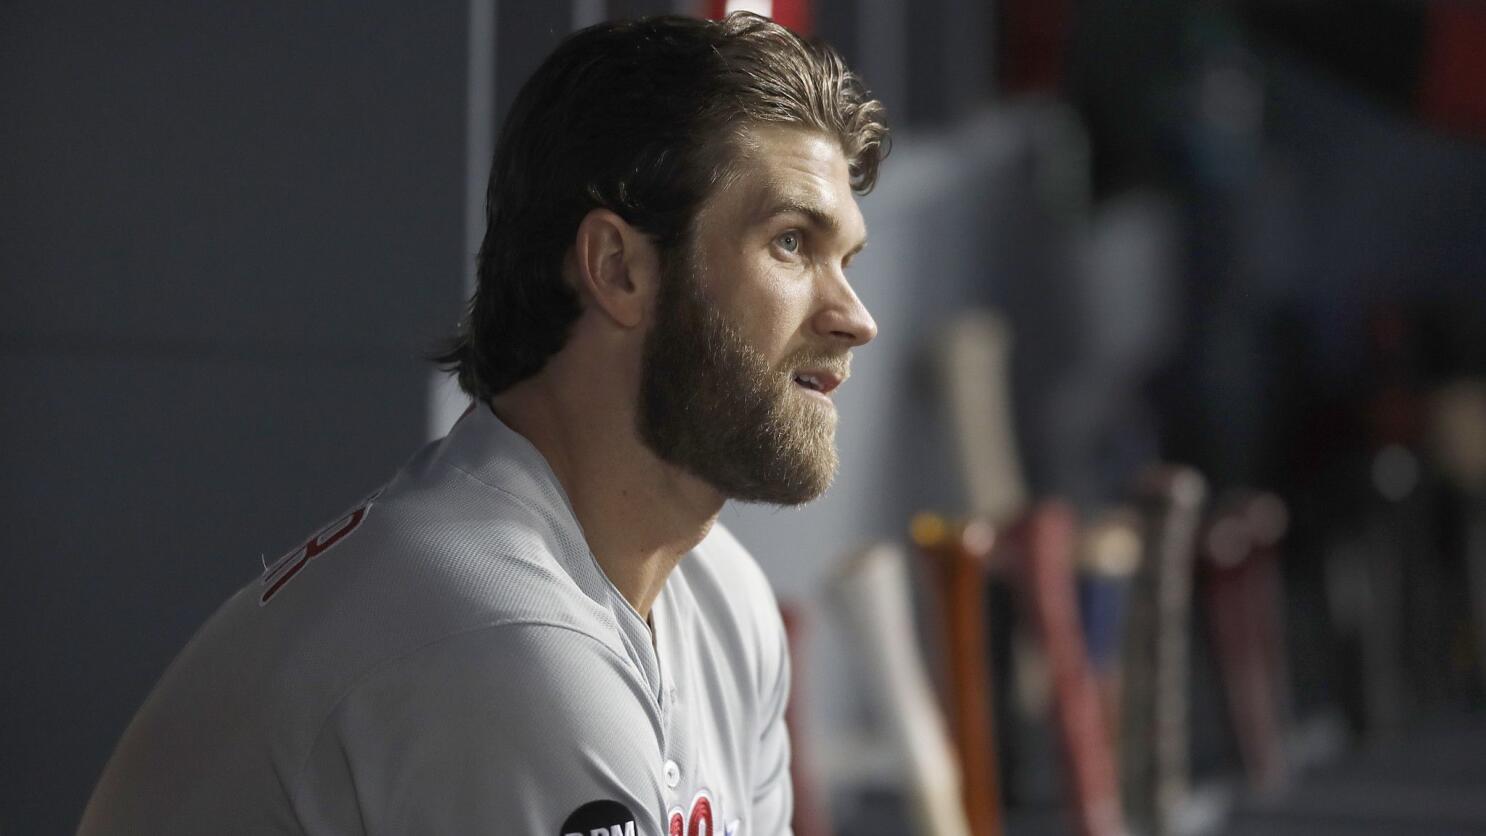 Why Bryce Harper would take short Dodgers deal over long Phillies